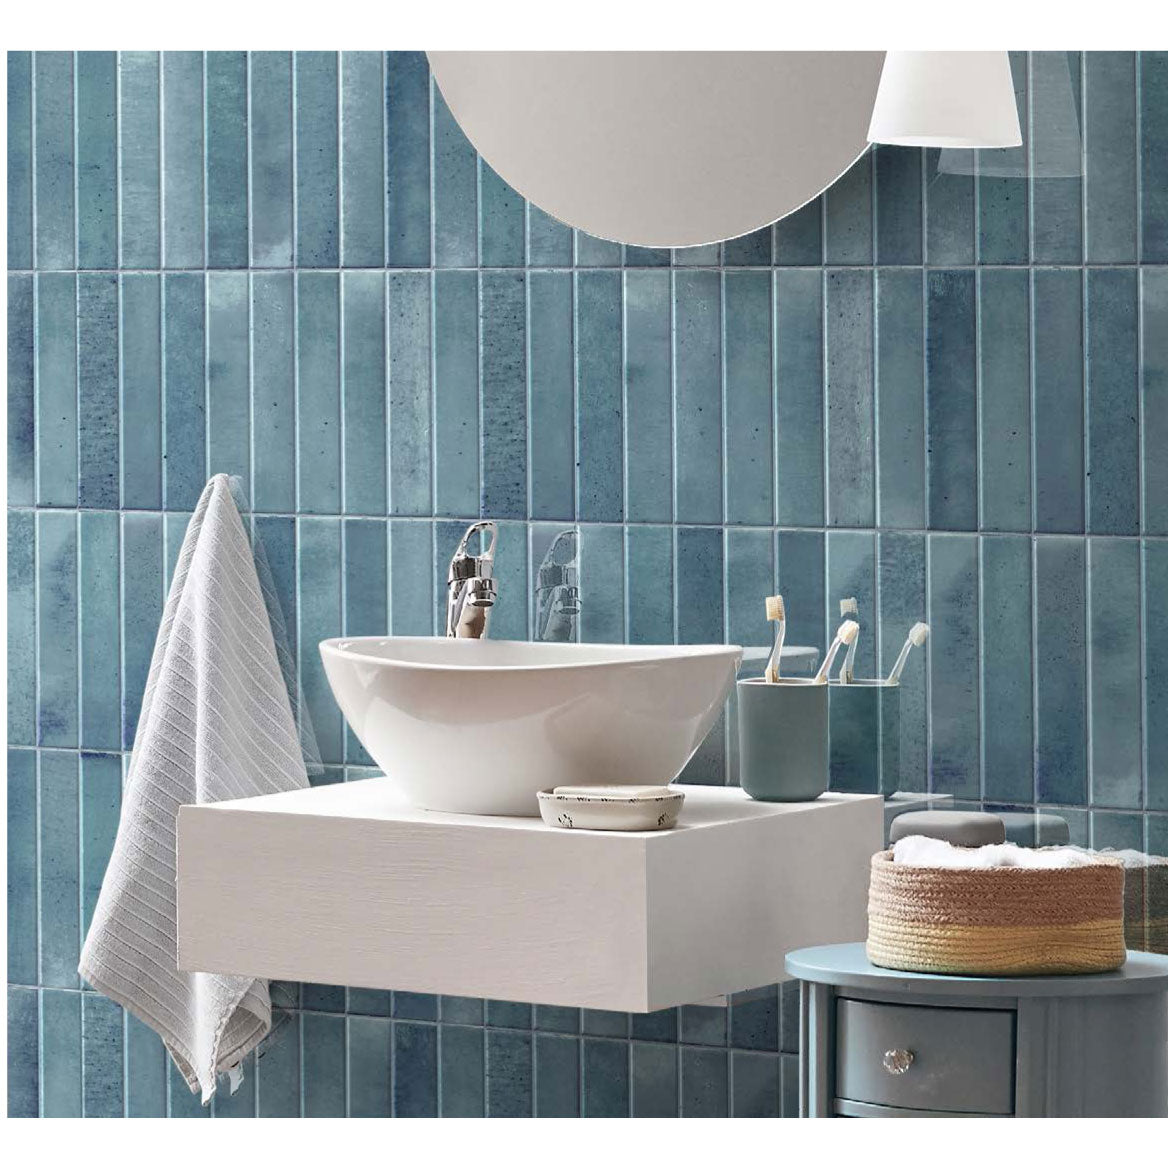 Cobsa - Homey Series 5 in. x 10 in. Porcelain Subway Tile - Sky Installed